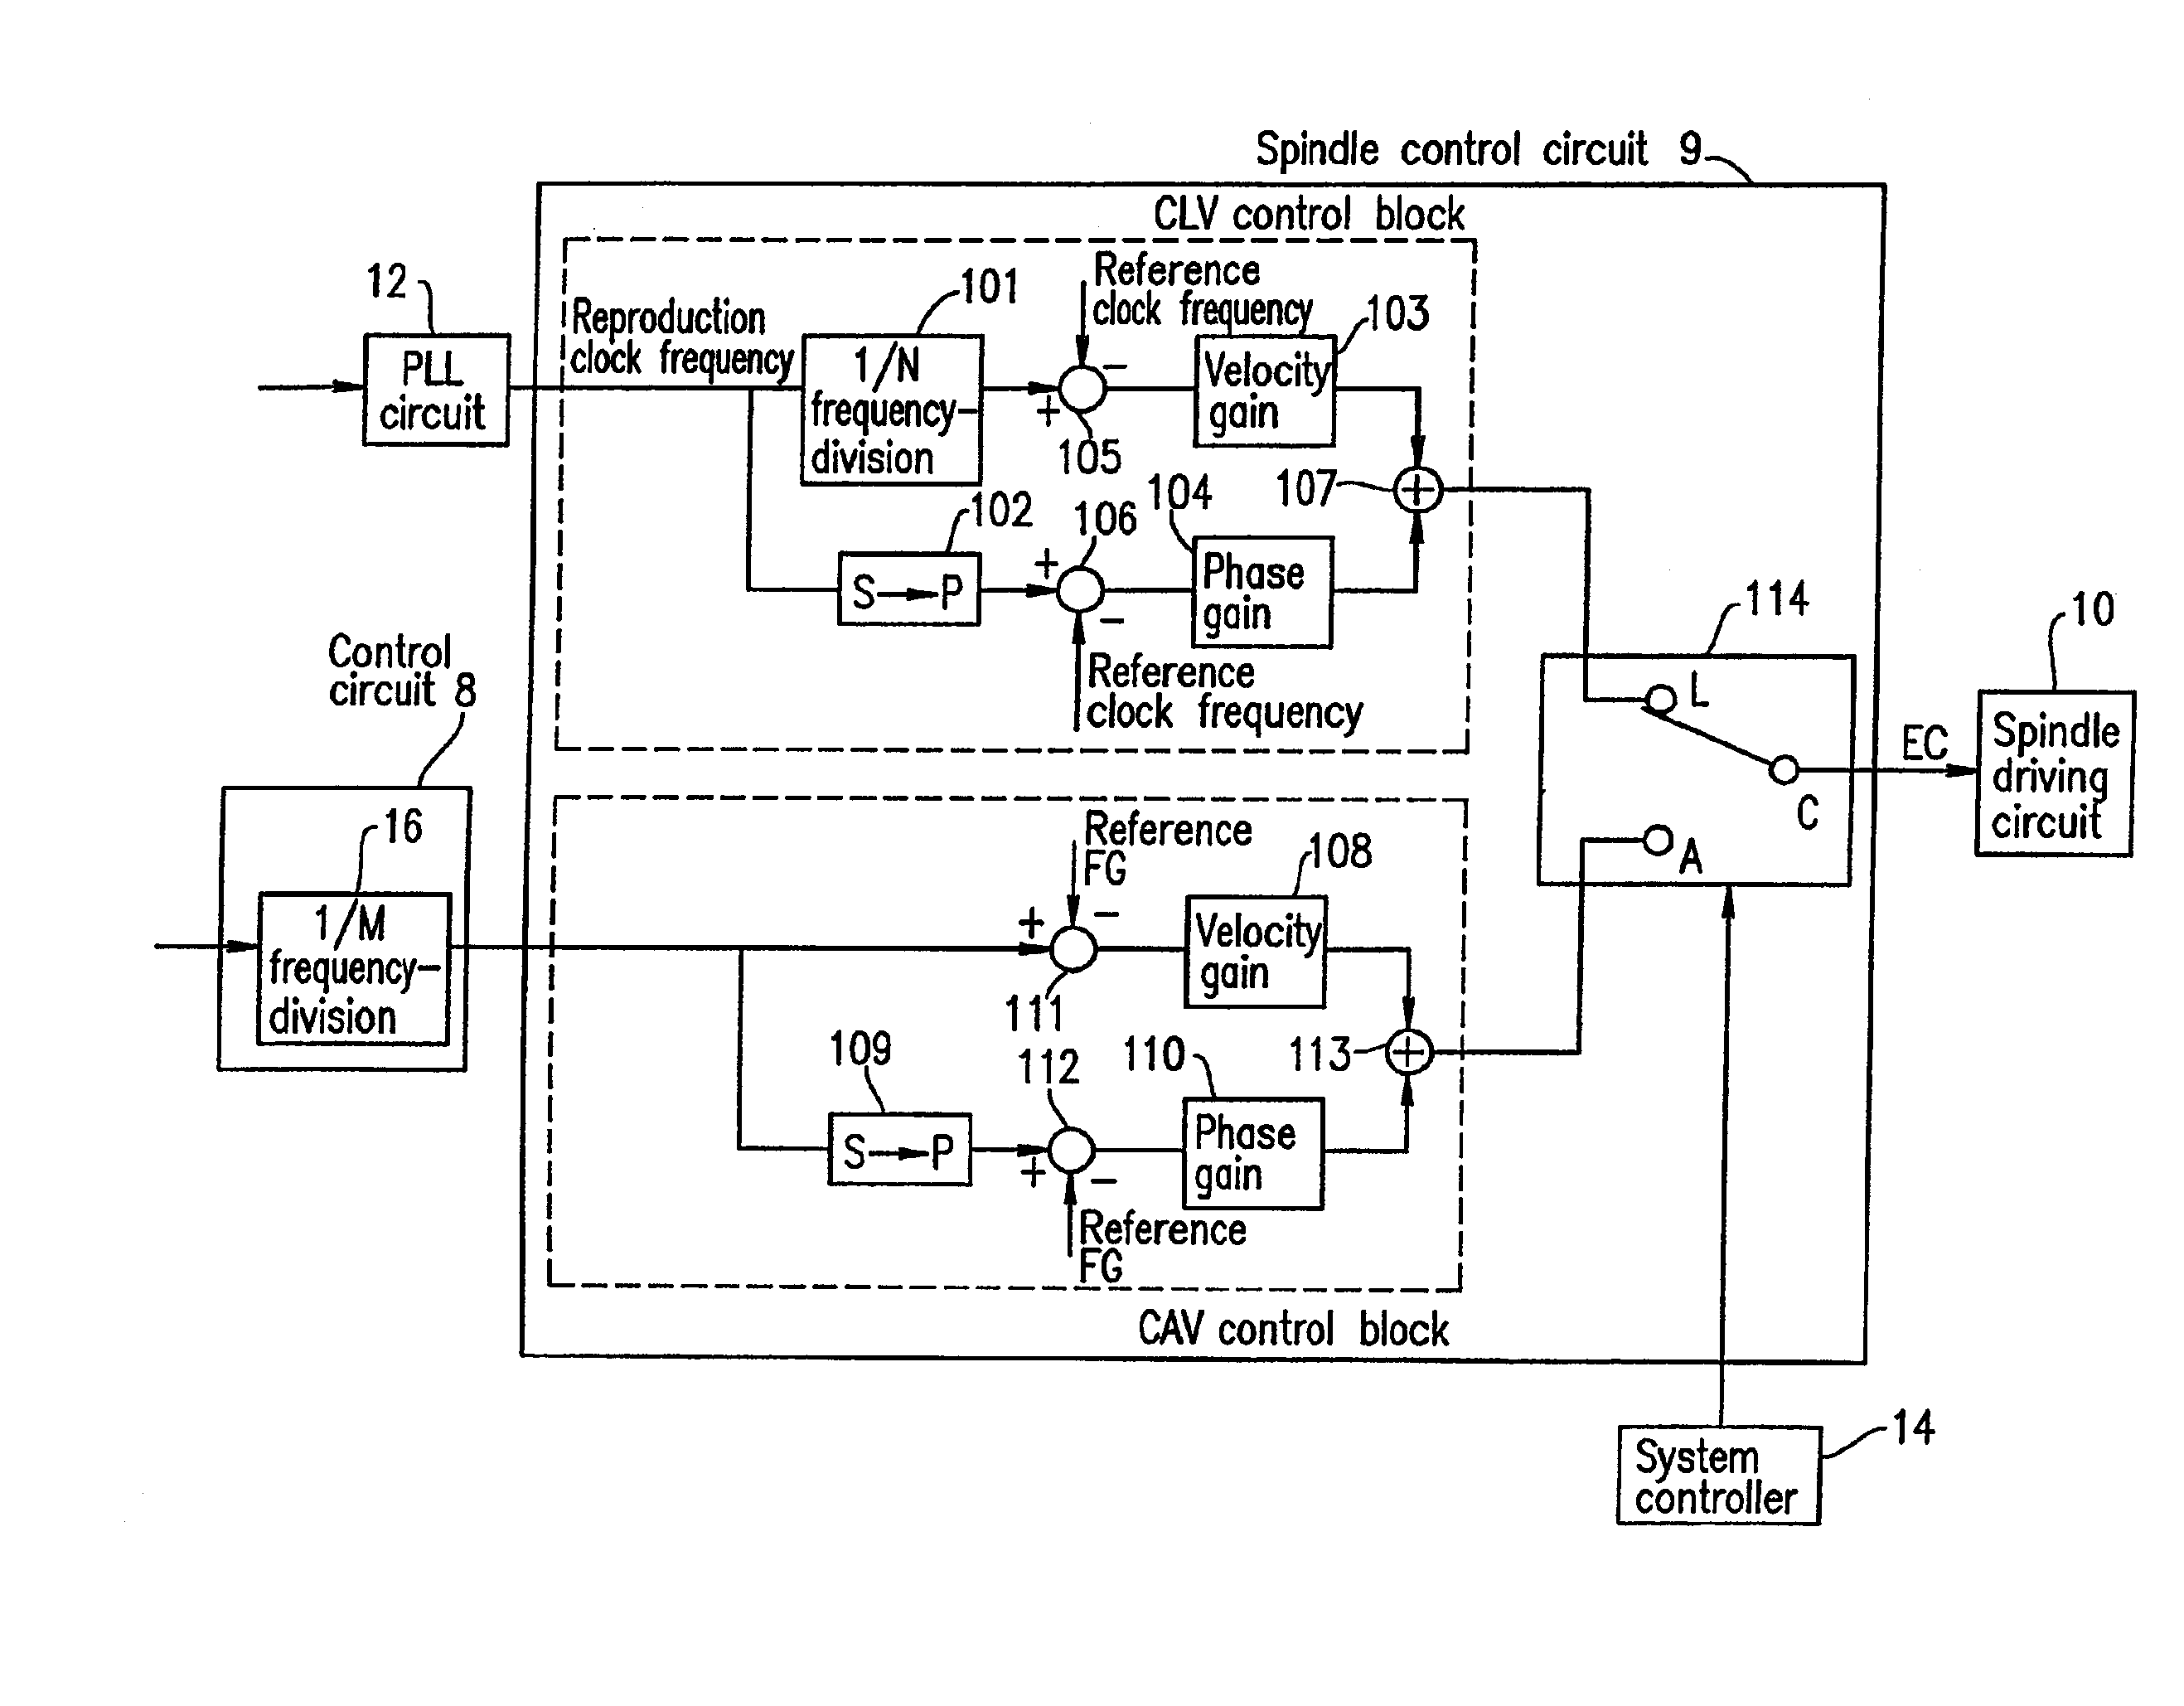 Information reproduction apparatus with selective CLV and CAV control